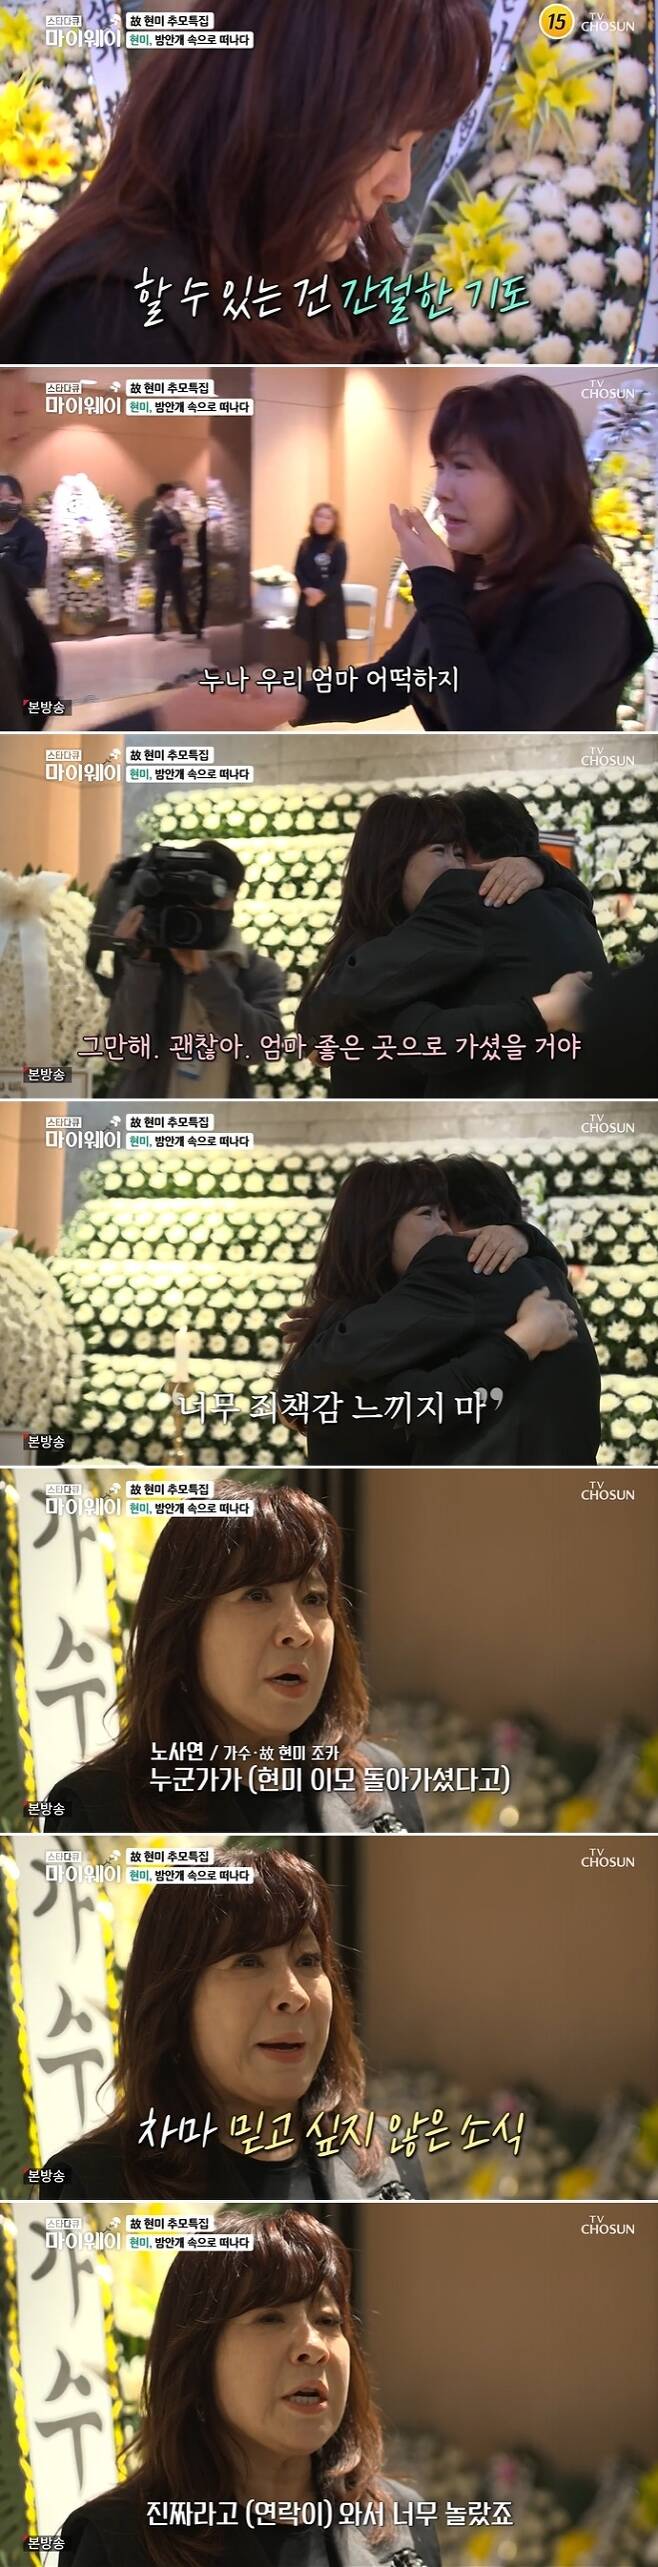 While the late Hyun Mee suddenly breathed, a big son miso-heated, saying, My mother died alone. Noh Sa-yeon comforted, Do not feel too guilty.On April 9, TV Chosun star documentary myway featured the life story of the late Hyun Mee, who was 85 years old and famous for his diary.Noh Sa-yeon, a nephew who visited Hyun Mees funeral home, shed tears, and hugged Hyun Mee a big son and miso-heated him.Hyun Mees a big son miso-heated, saying, My mom was alone and went away. Im the bad guy. Then Noh Sa-yeon comforted, My mom must have gone to a good place. Dont feel too guilty.Hyun Mees two sons are both cars that were in the U.S. In response, a big son kept crying, saying, My mom is so pitiful.Noh Sa-yeon said, I was so sad that Aunt was alone and went away. Someone told me (that Aunt died) and I said, No way, its a lie. Because there are so many fake news.Then I was so surprised that it was real. 